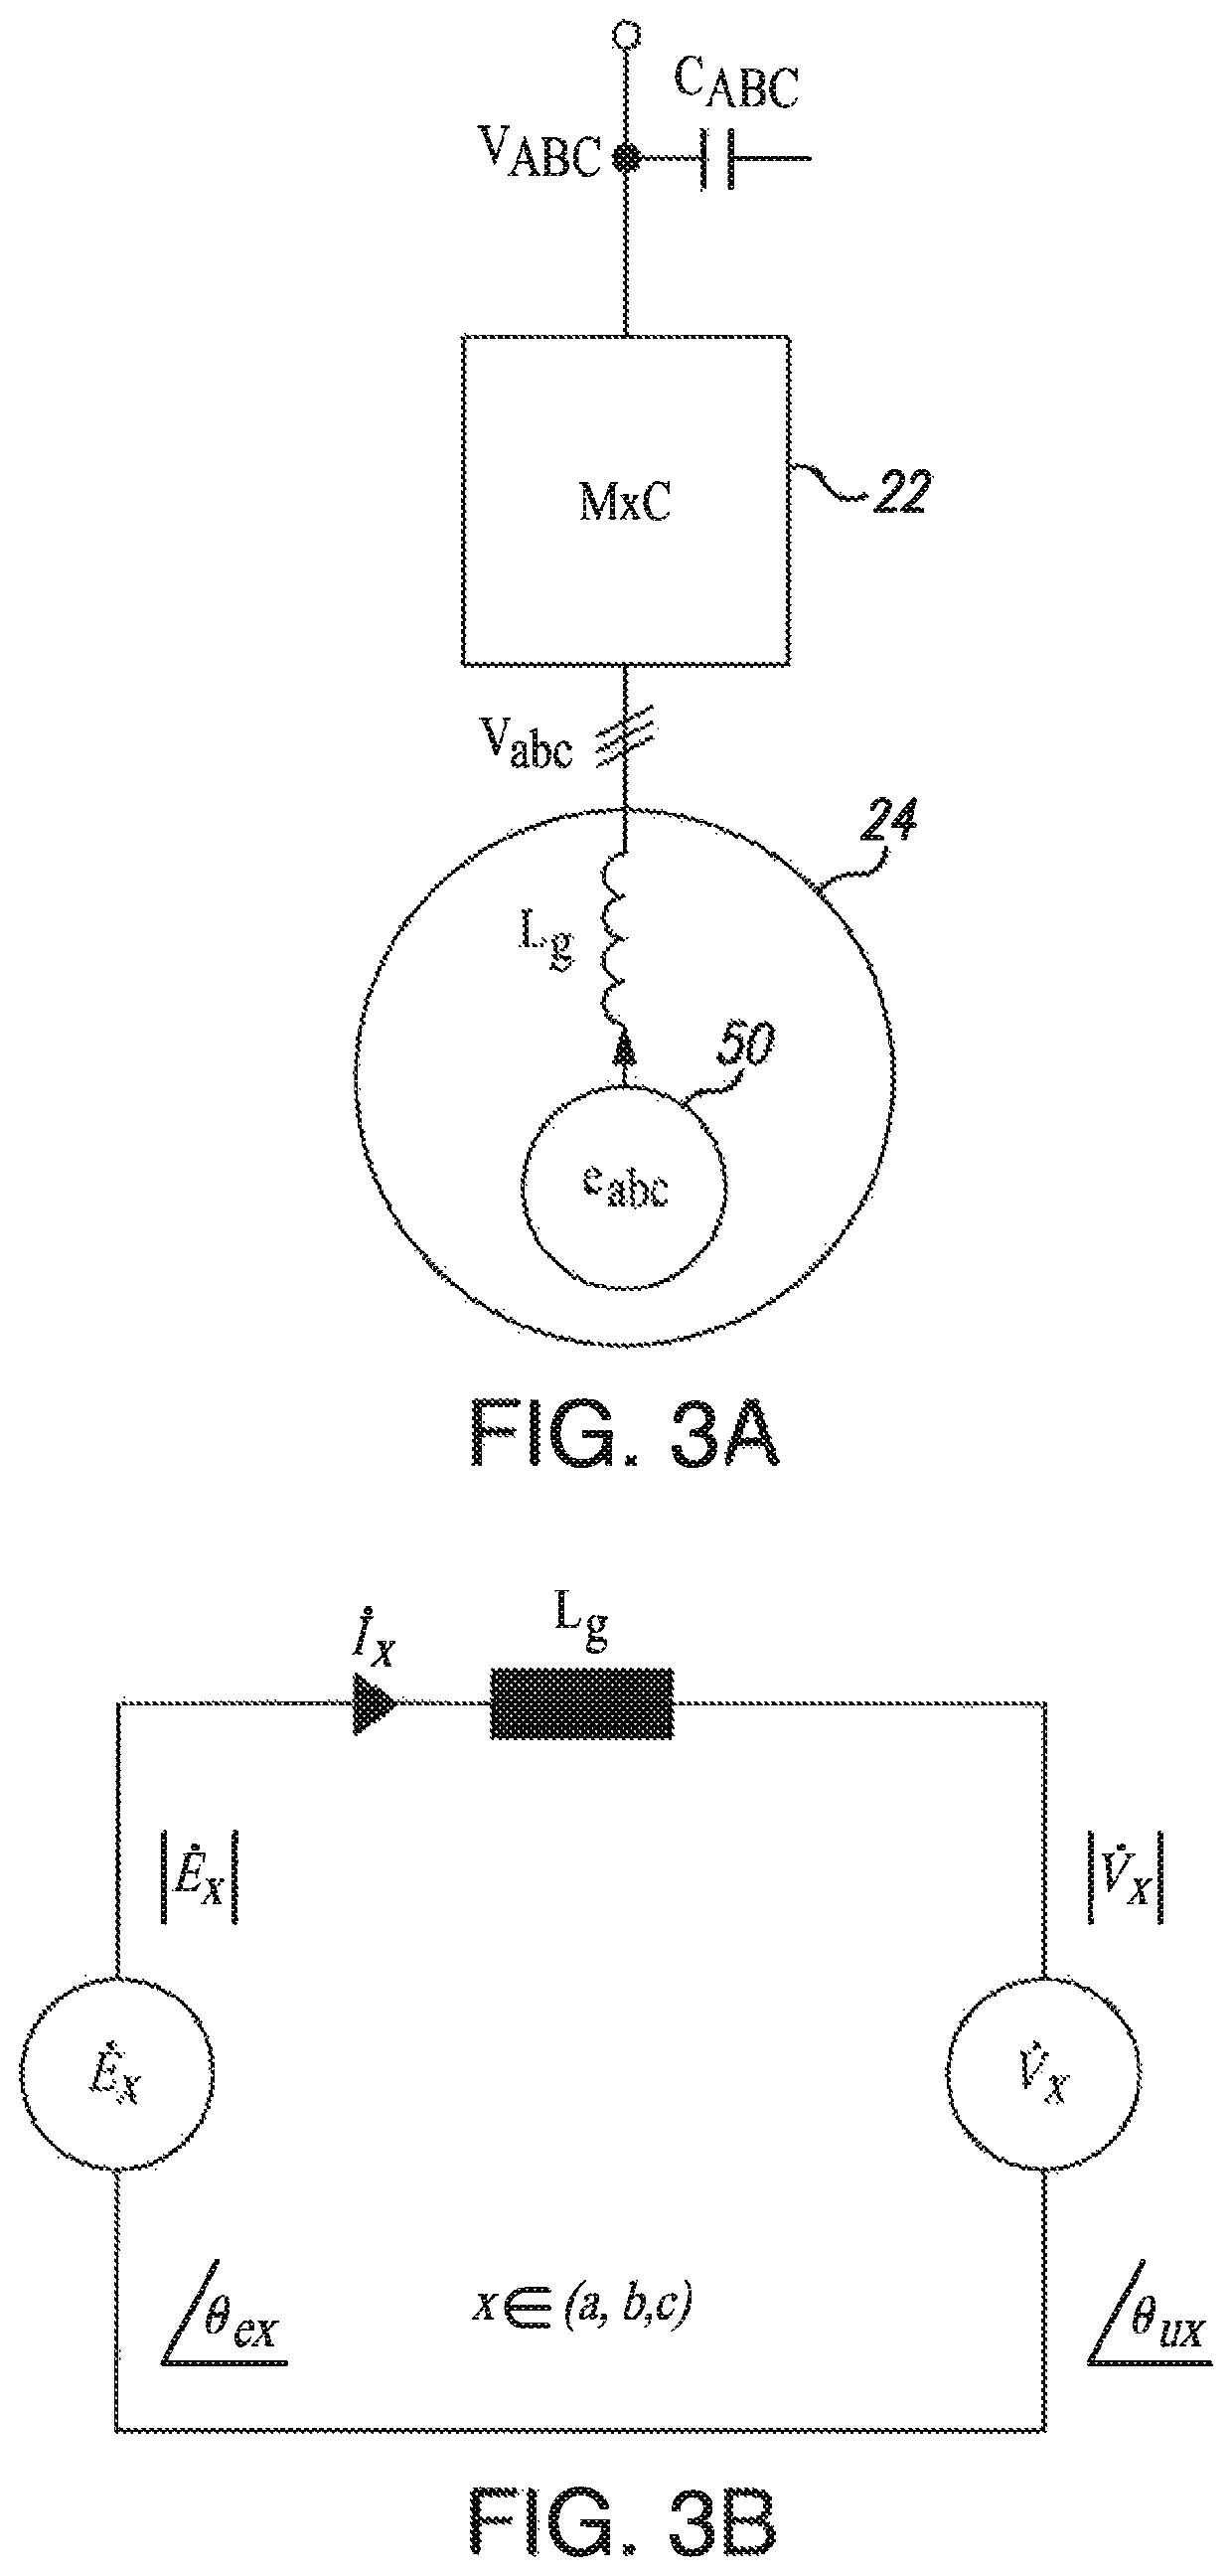 Matrix converter operating in current control mode using feed forward signals